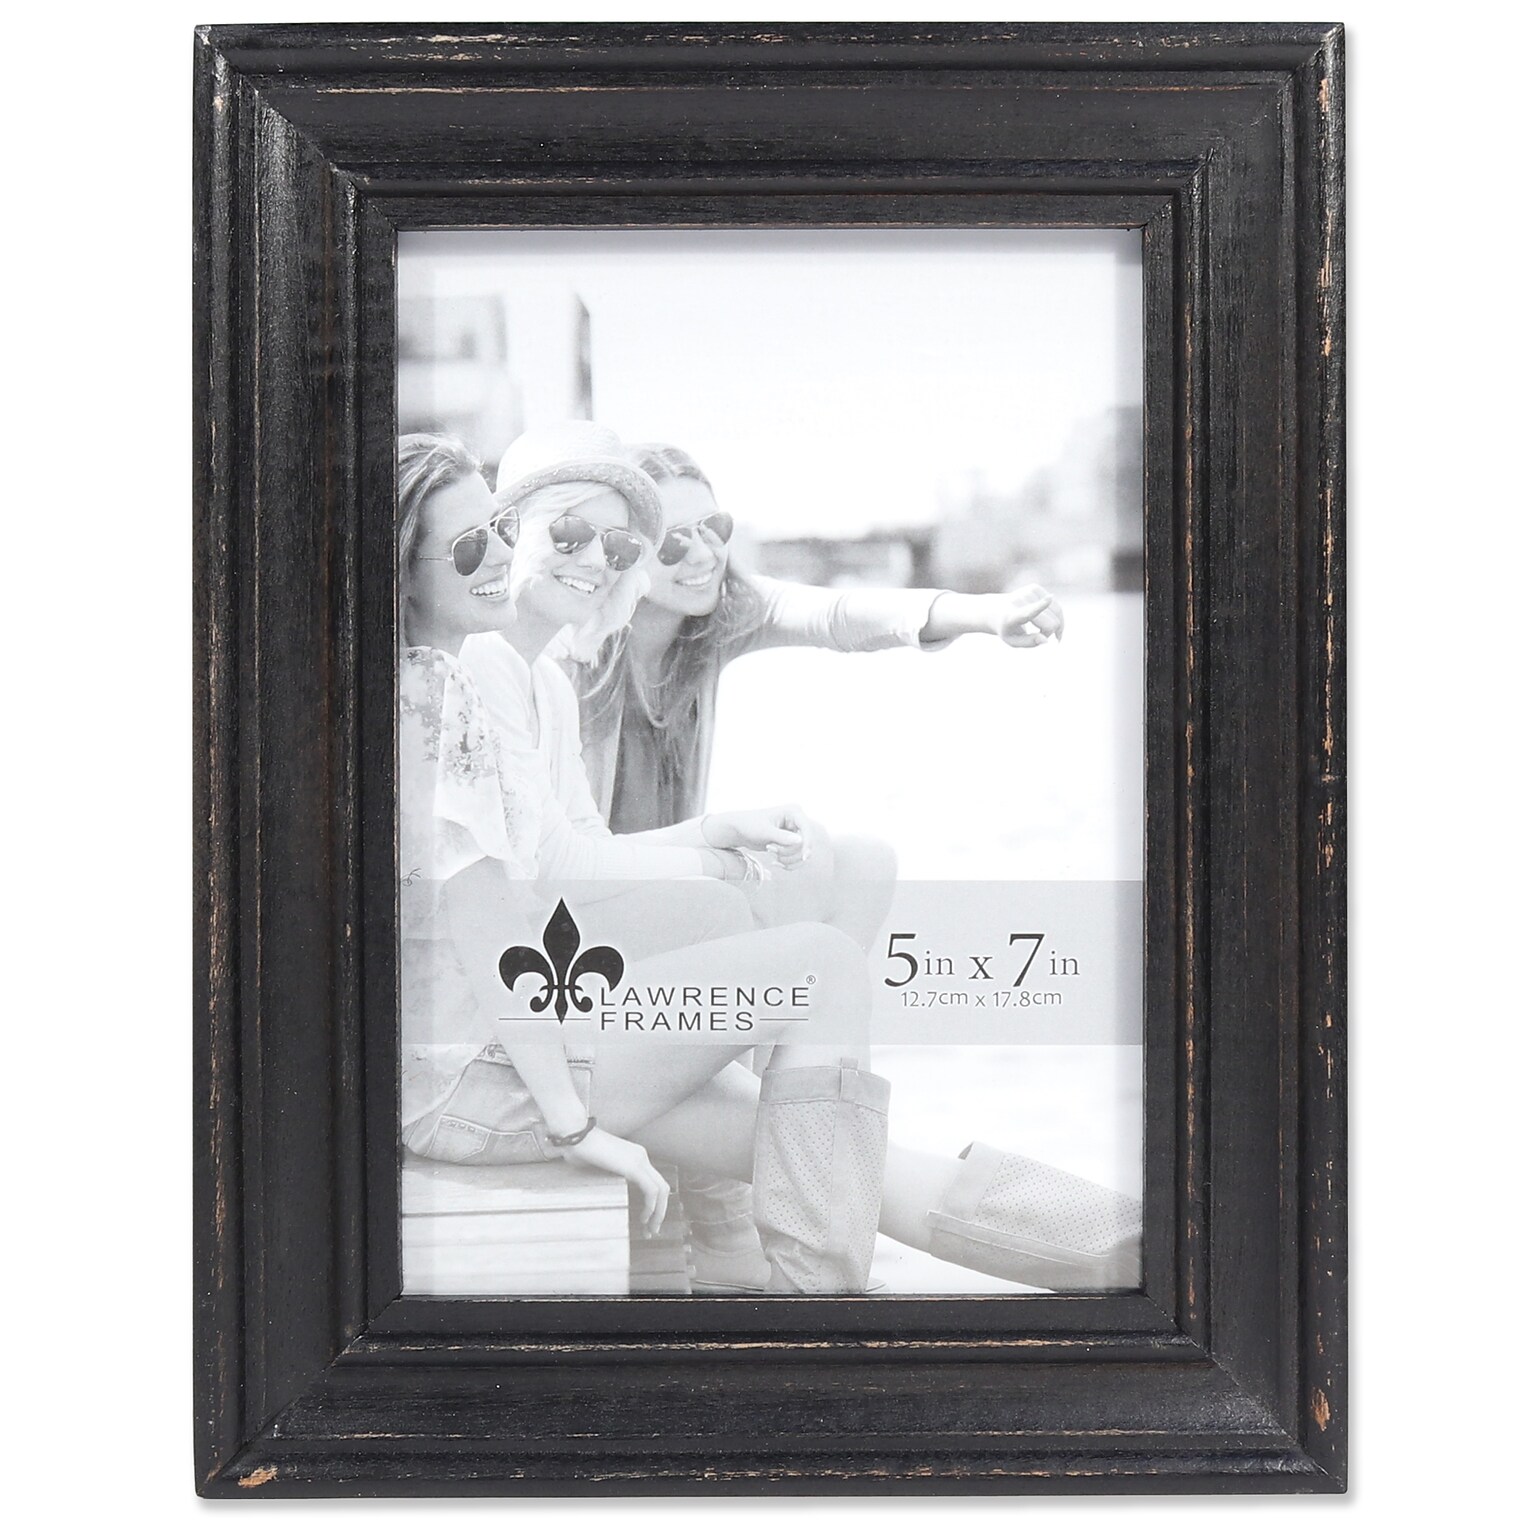 Lawrence Frames 5W x 7H Durham Weathered Black Wood Picture Frame (746557)